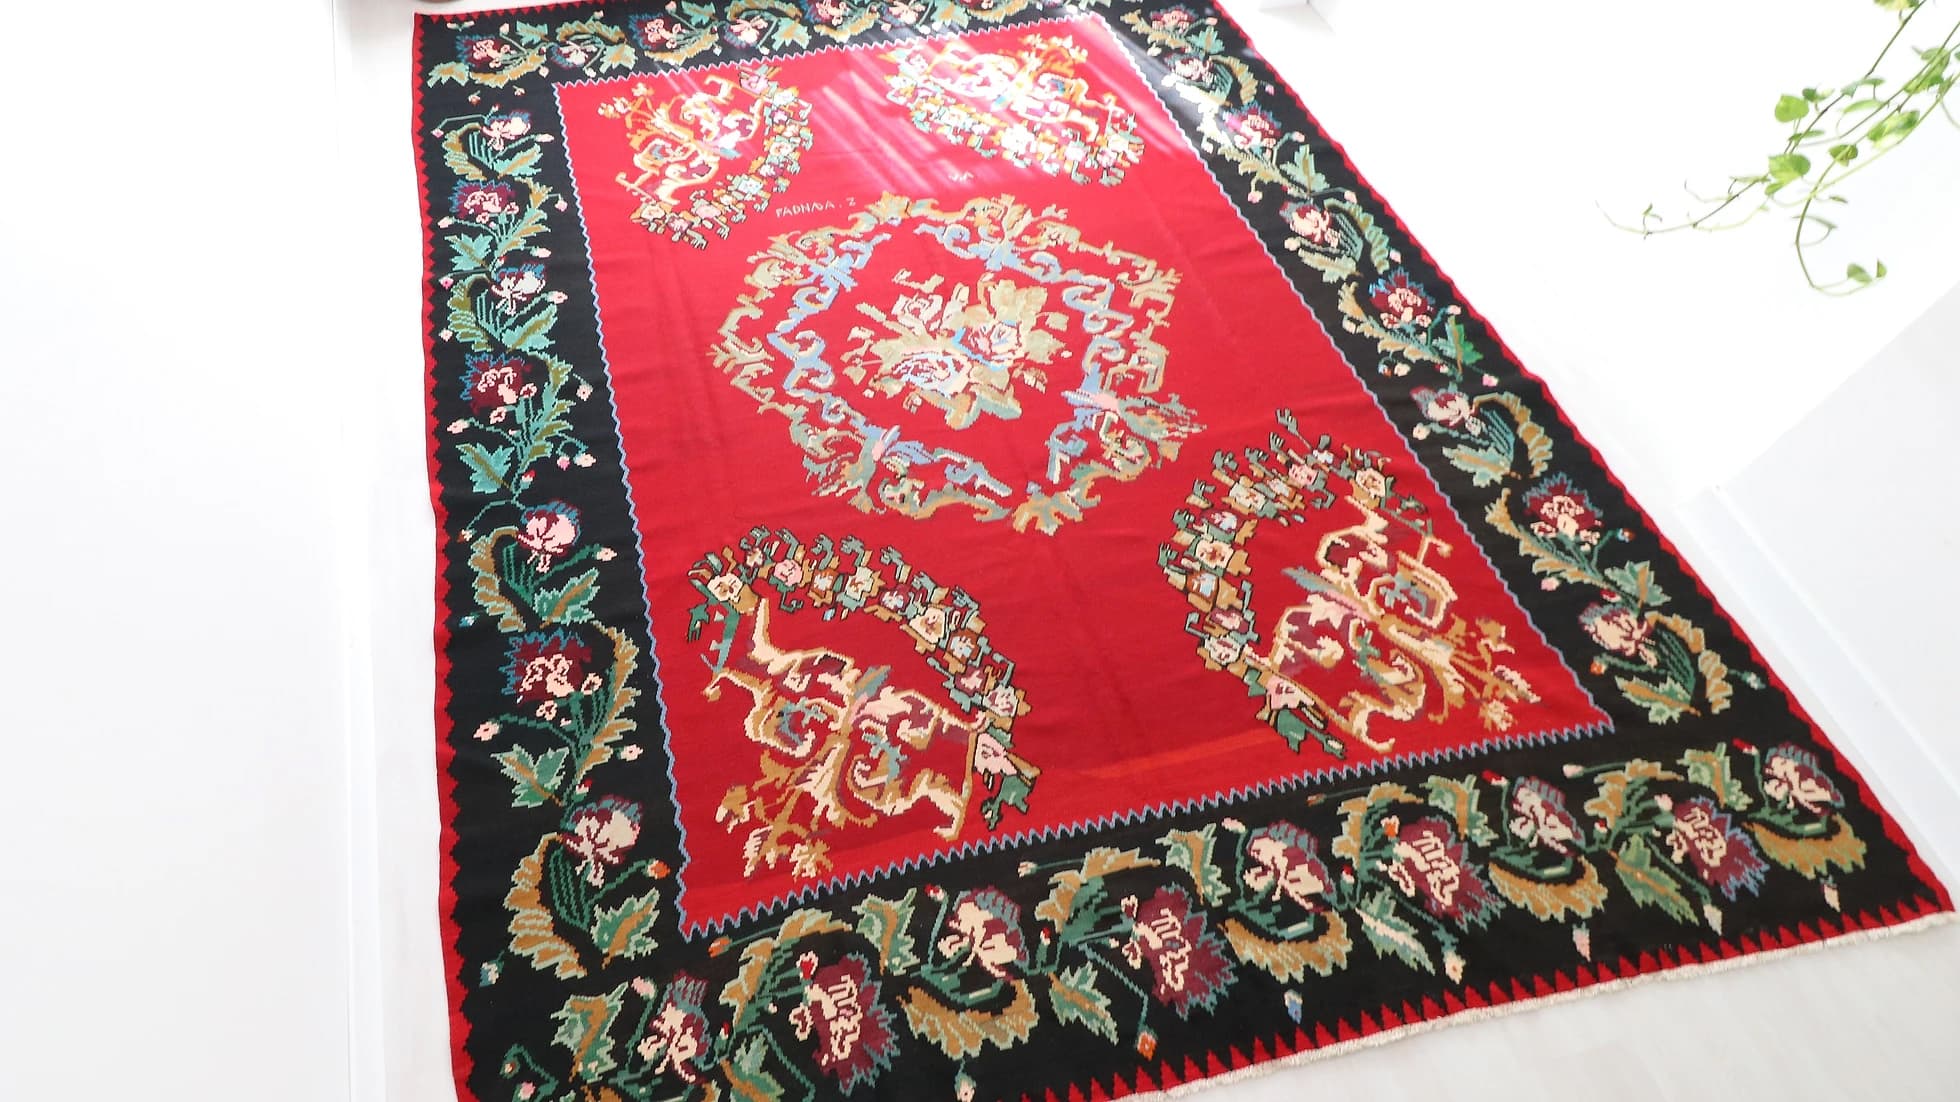 Vintage Hand-knotted Bessarabian Rug in red shades with floral design signed by the artisan